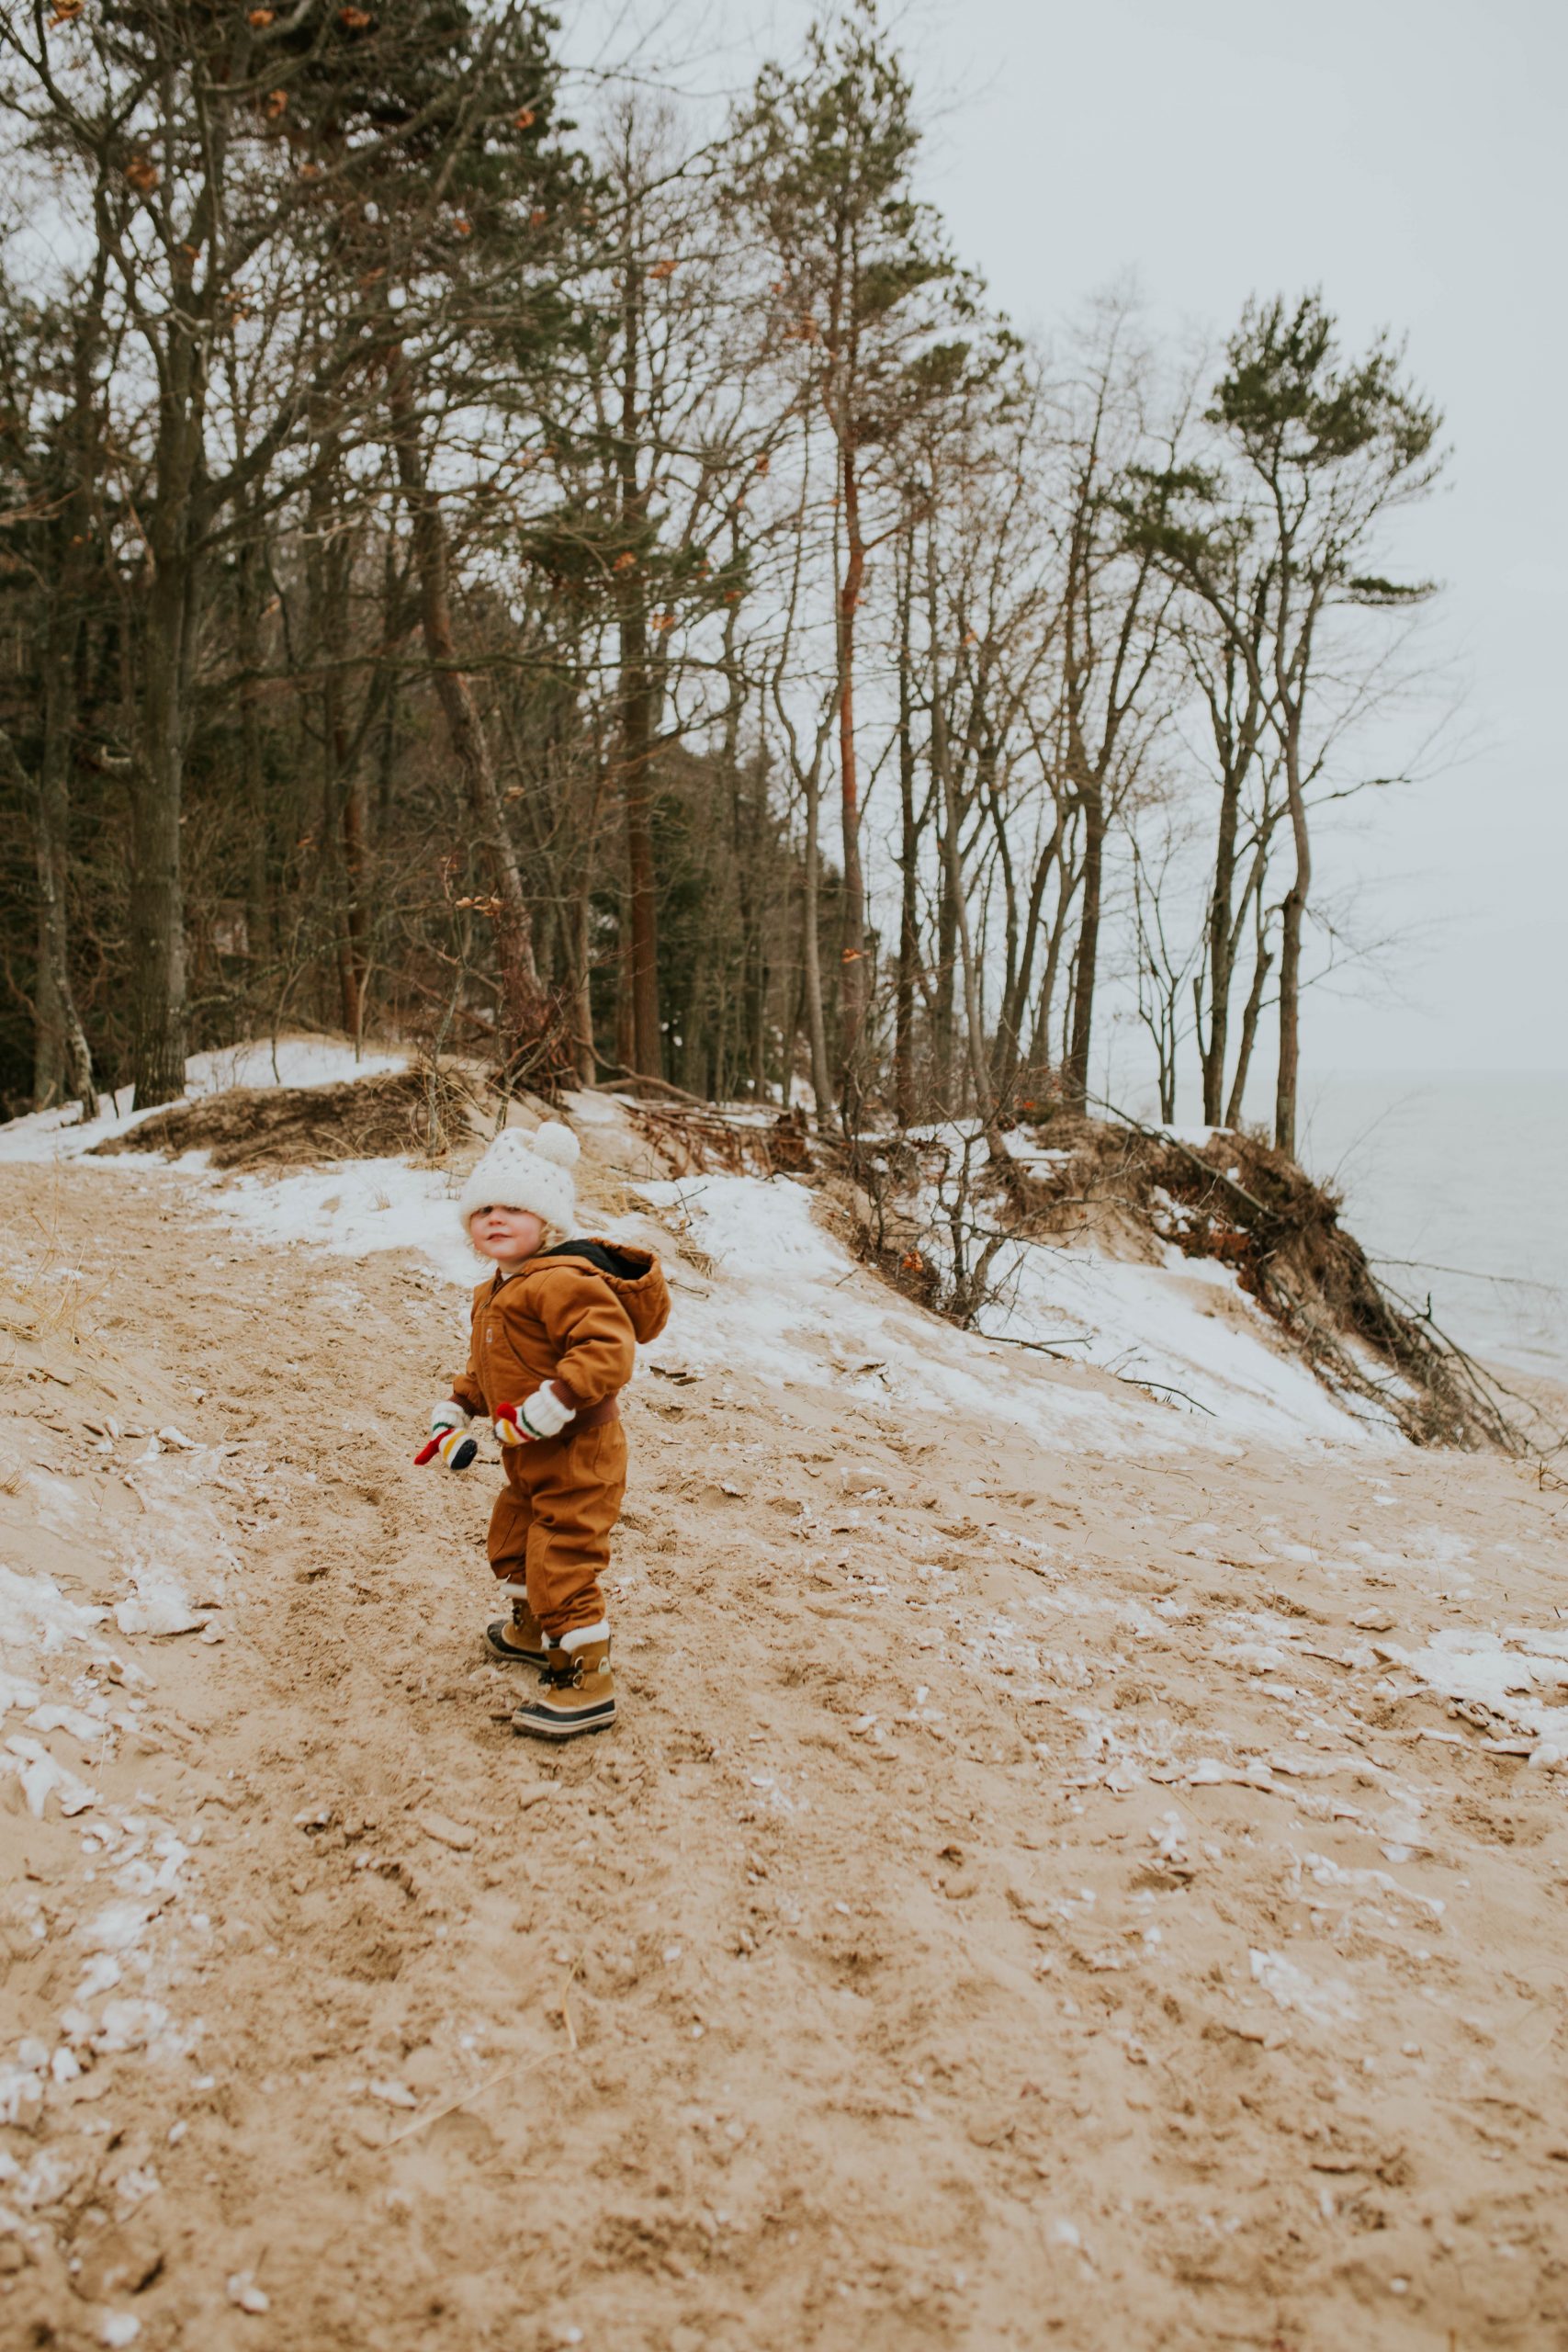 From the farm to the sledding hill the most comfortable and warm outdoor gear for kids